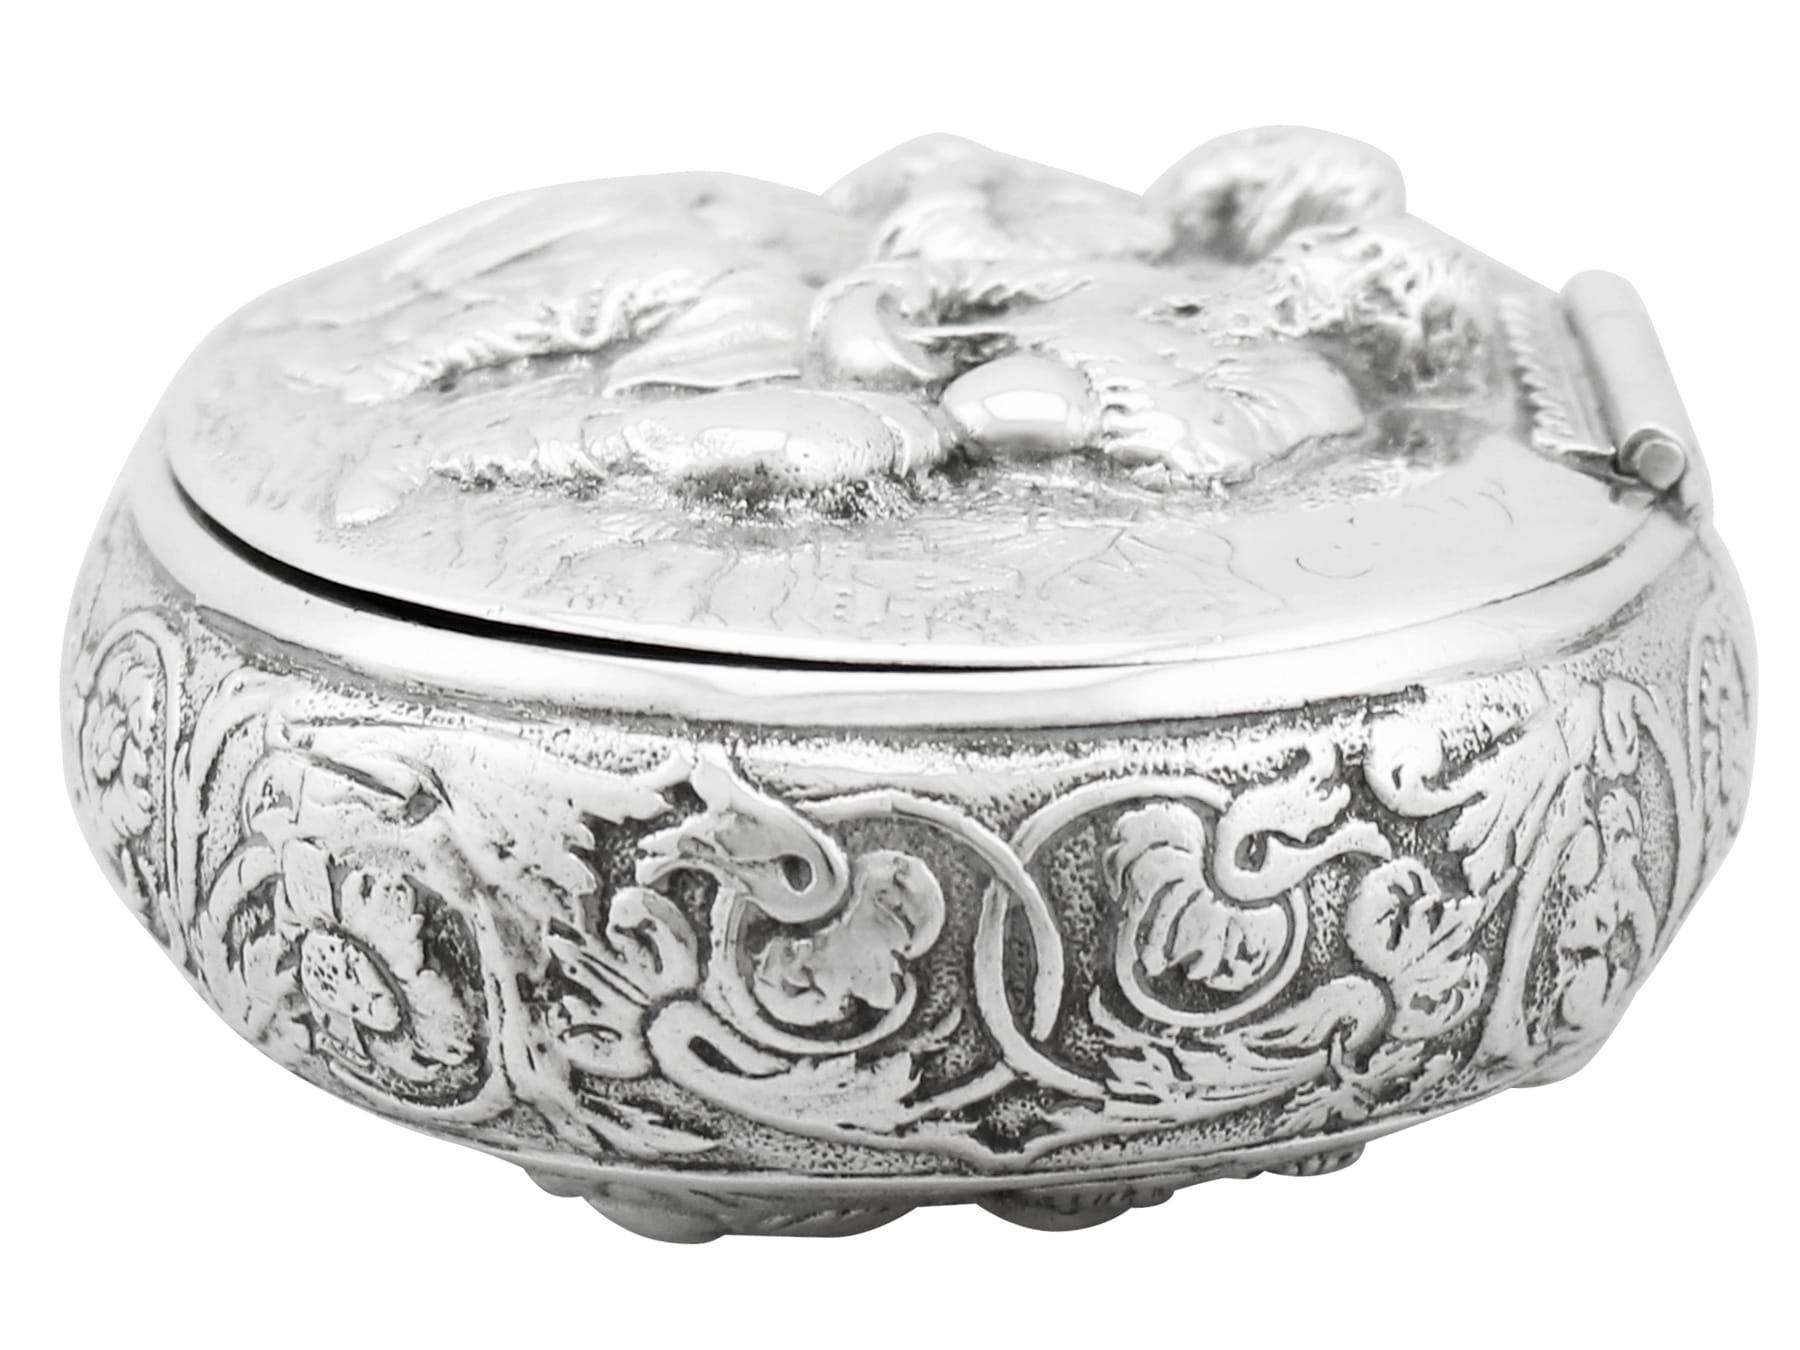 1690s Antique Dutch Silver Tobacco Box In Excellent Condition For Sale In Jesmond, Newcastle Upon Tyne